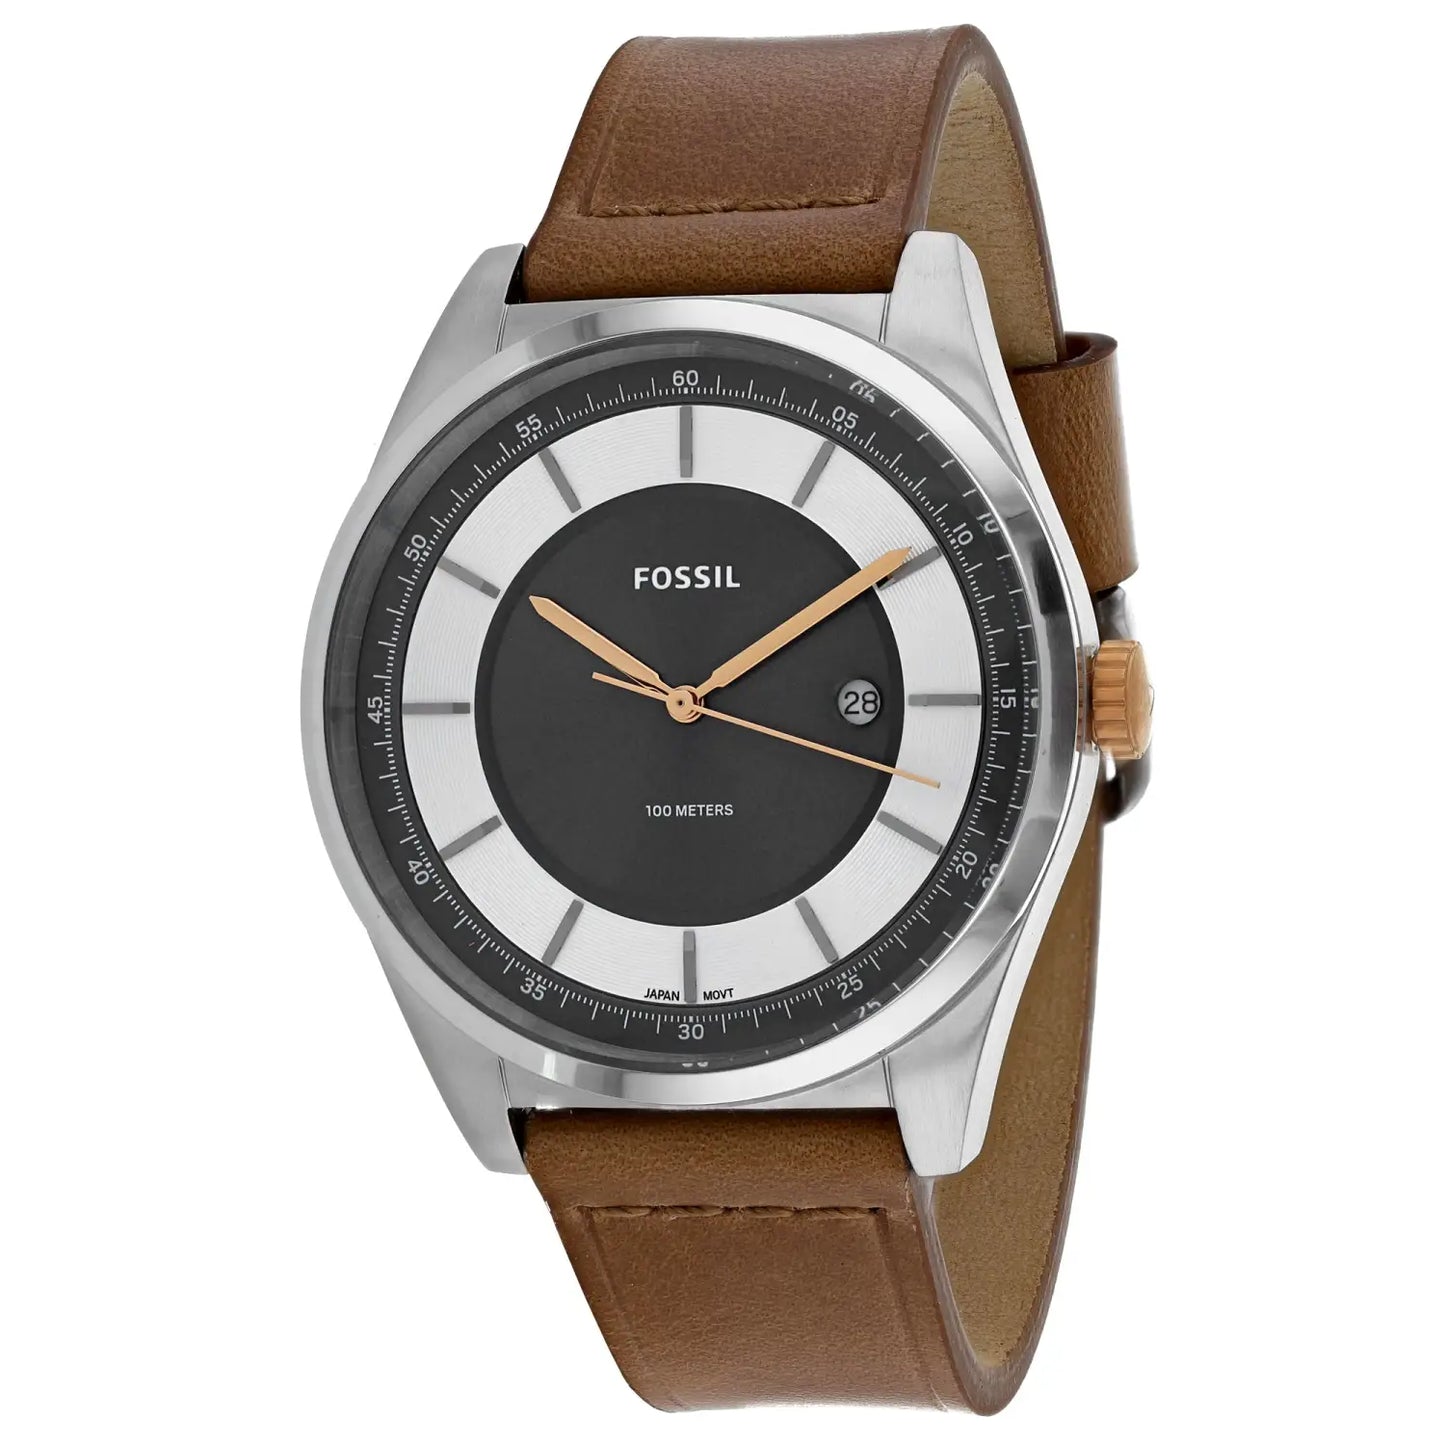 Fossil Men’s Mathis 100m Stainless Steel Leather Watch